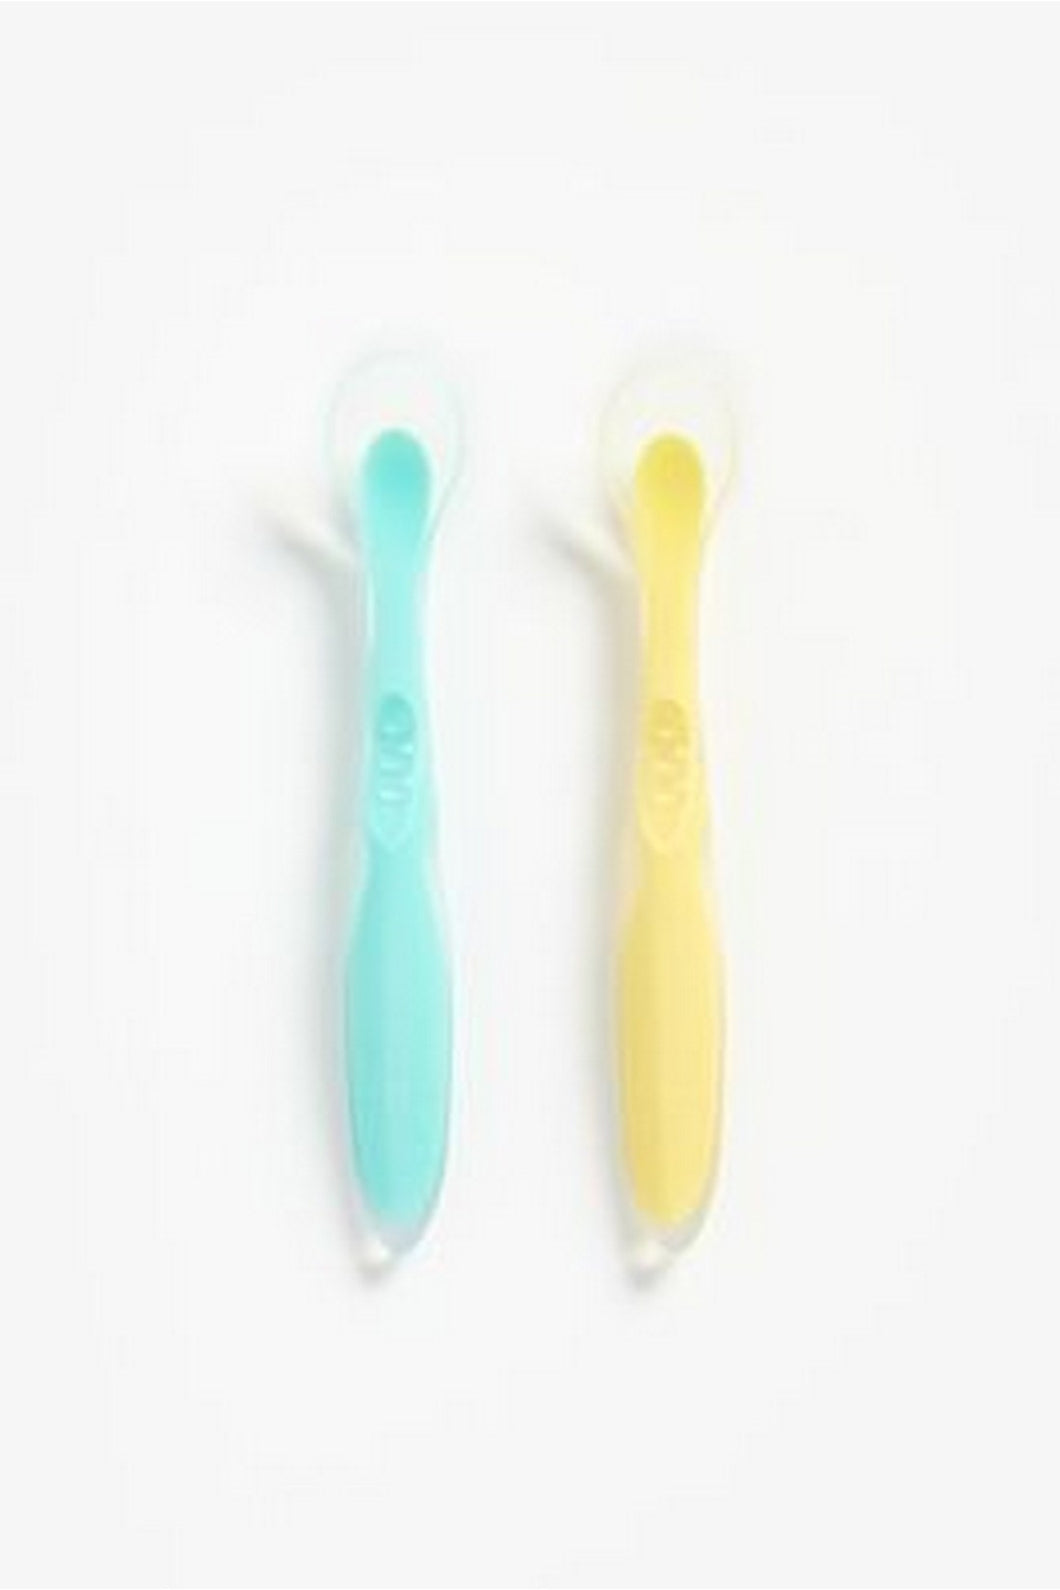 Mothercare Soft Silicone Spoons 2 Pack 1